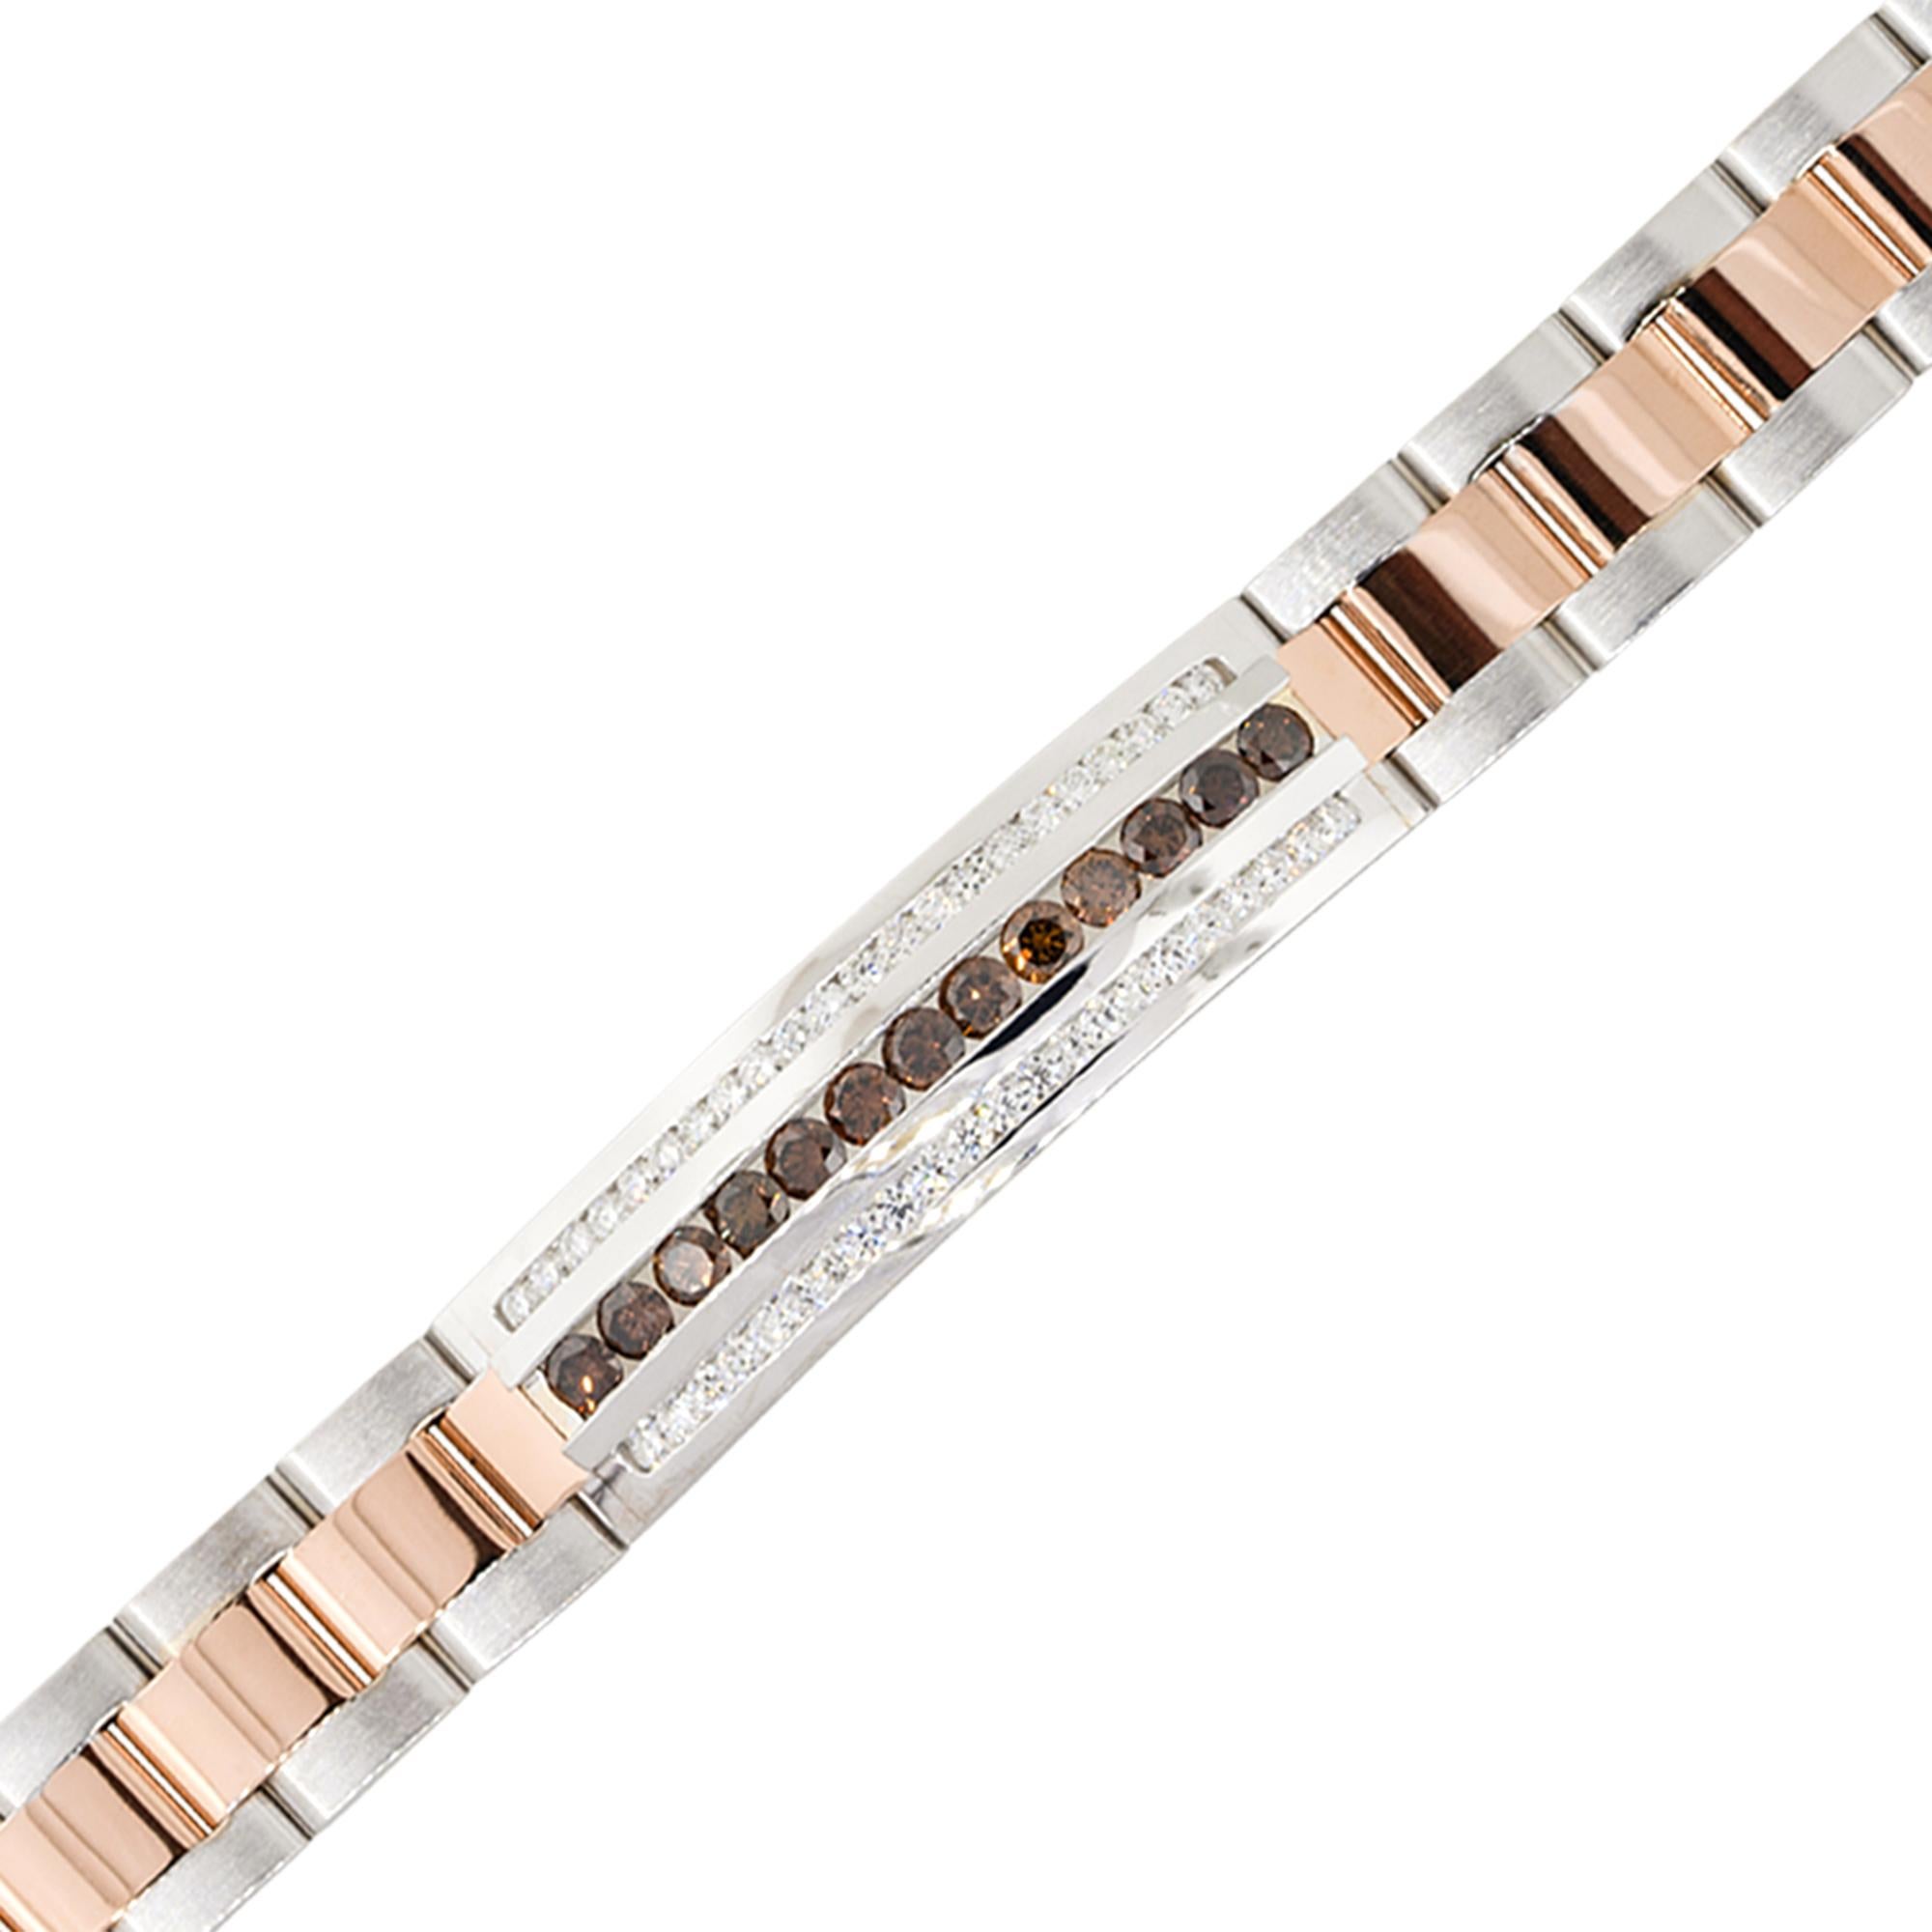 Material: 14k rose gold, stainless steel
Diamond details: Approx. 5ctw of round cut diamonds. Diamonds are Fancy Brown (Cognac), G/H in color and VS in clarity
Clasps: Tongue in box
Total Weight: 54.2g (34.9dwt)
Bracelet measurements: 8